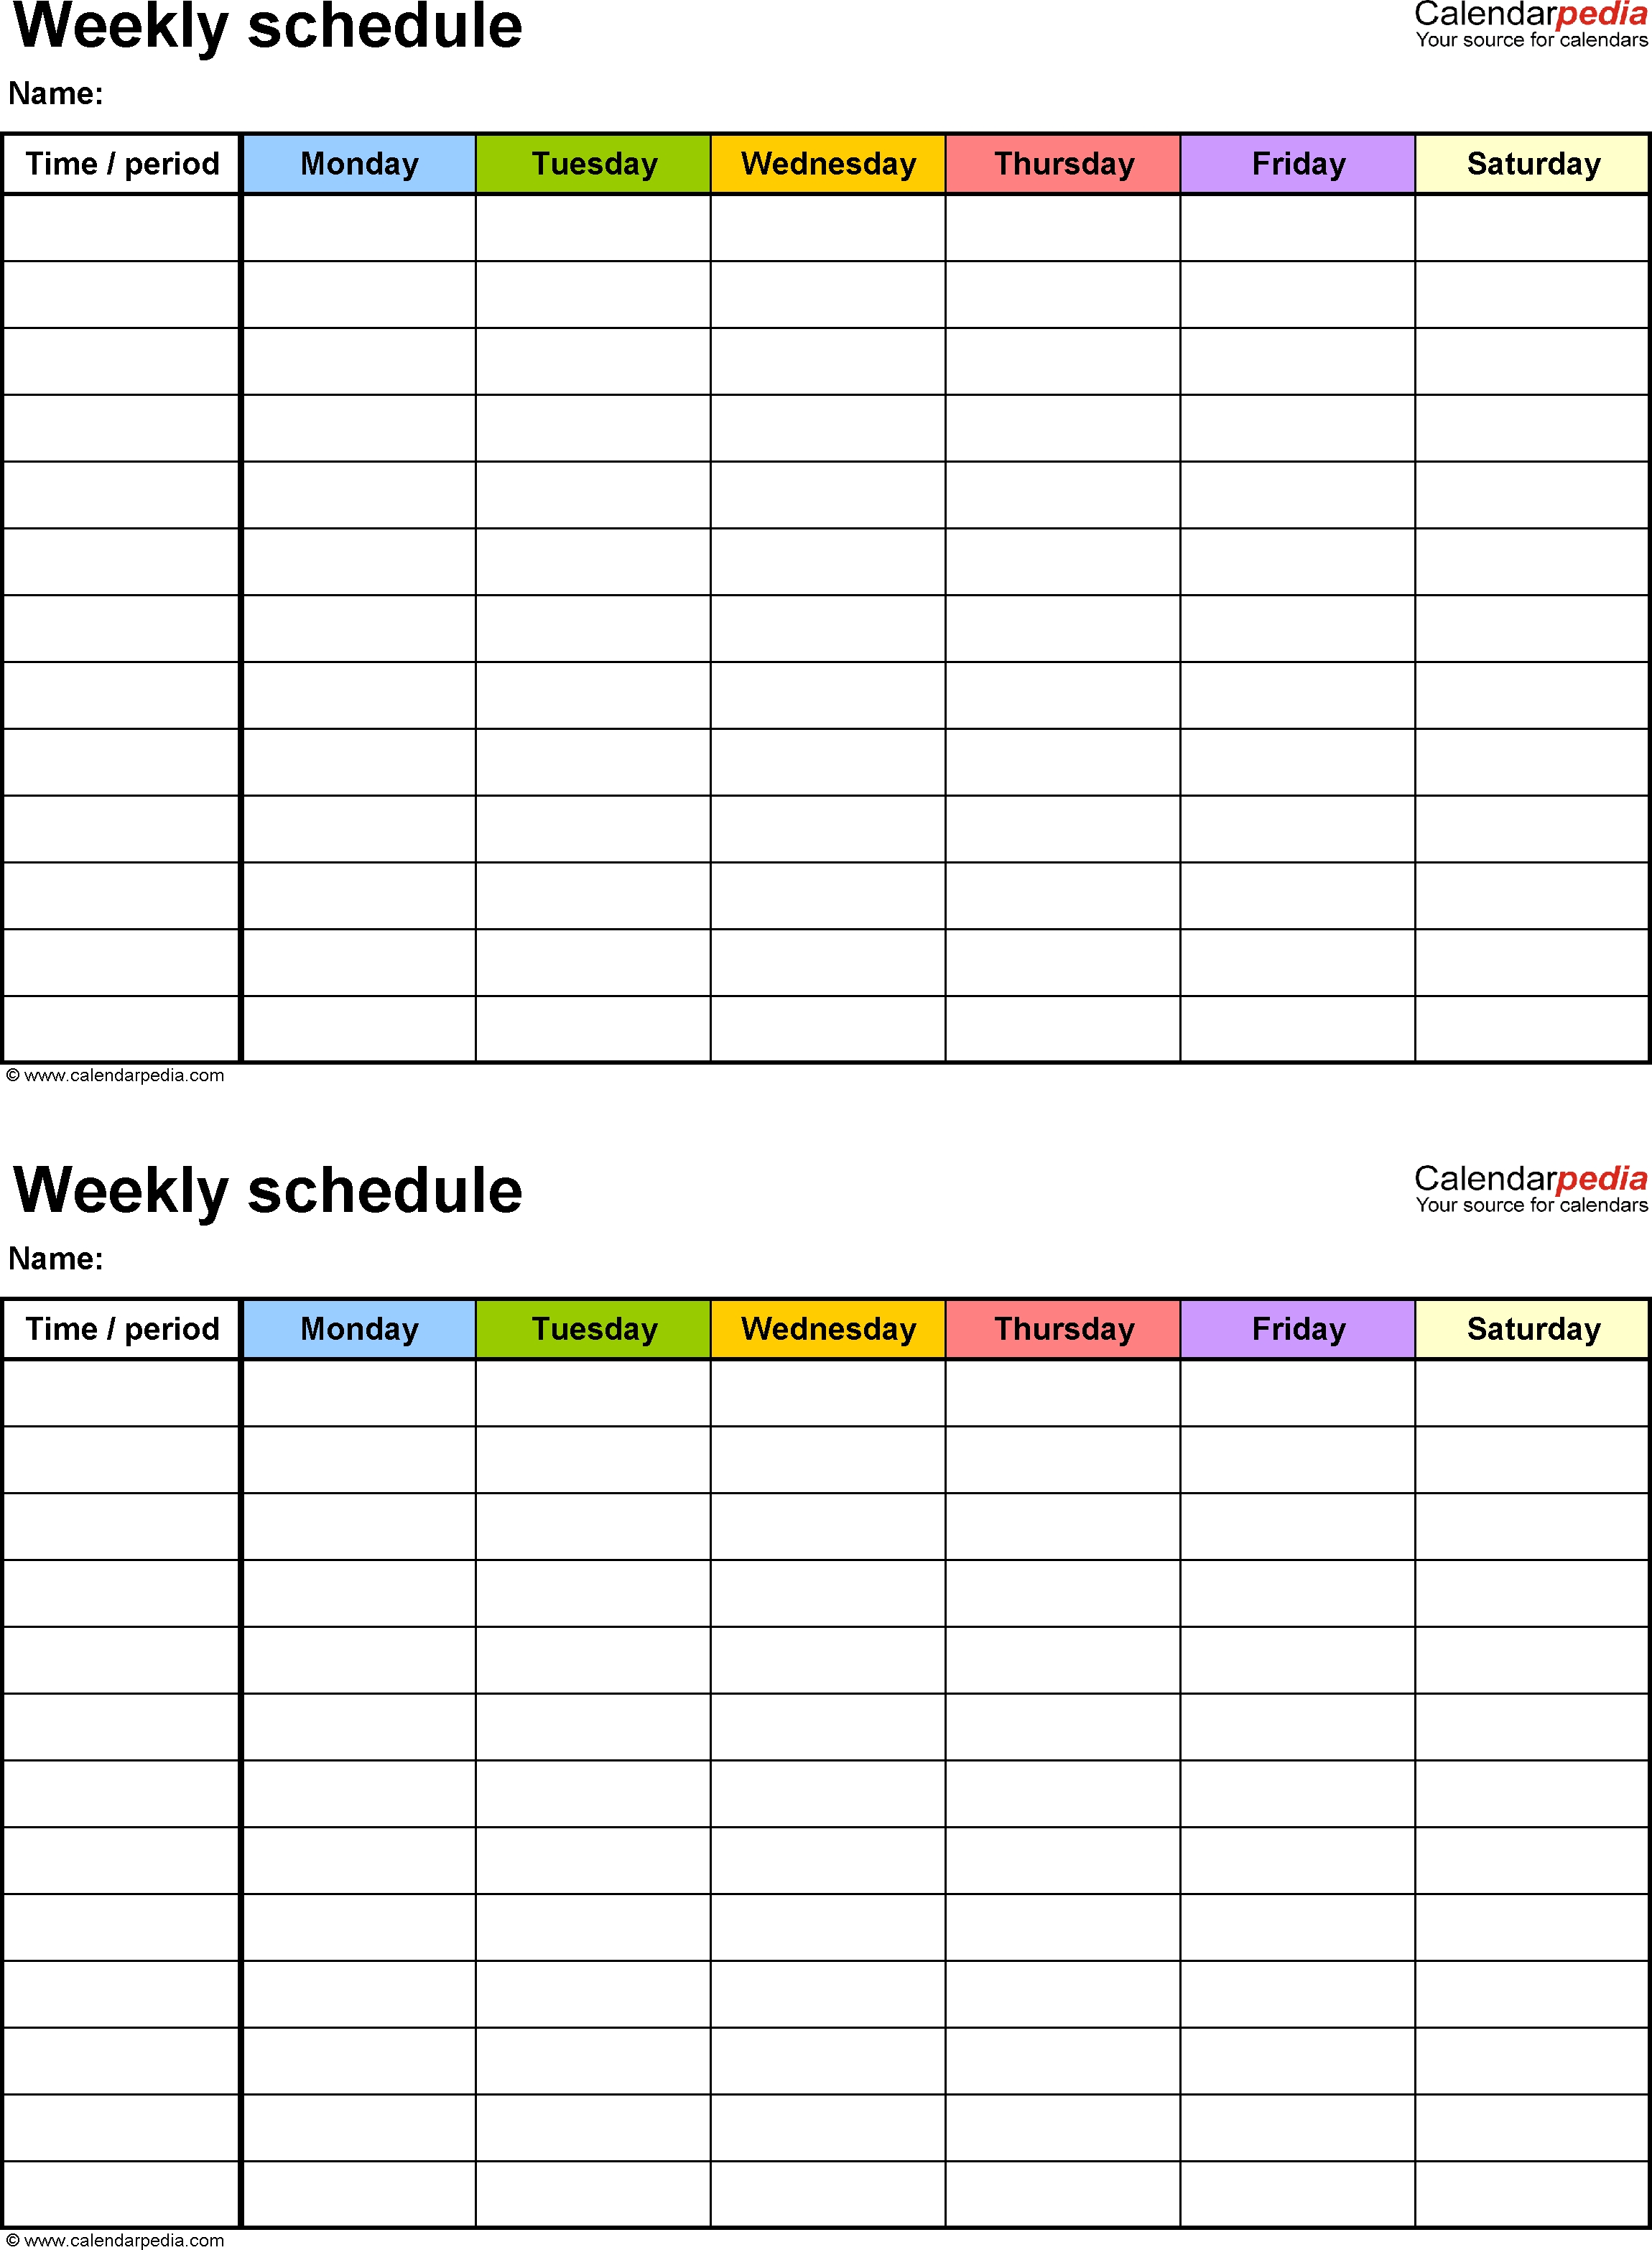 Free Weekly Schedule Templates For Pdf - 18 Templates for Two-Week Calendar Template Word Printable